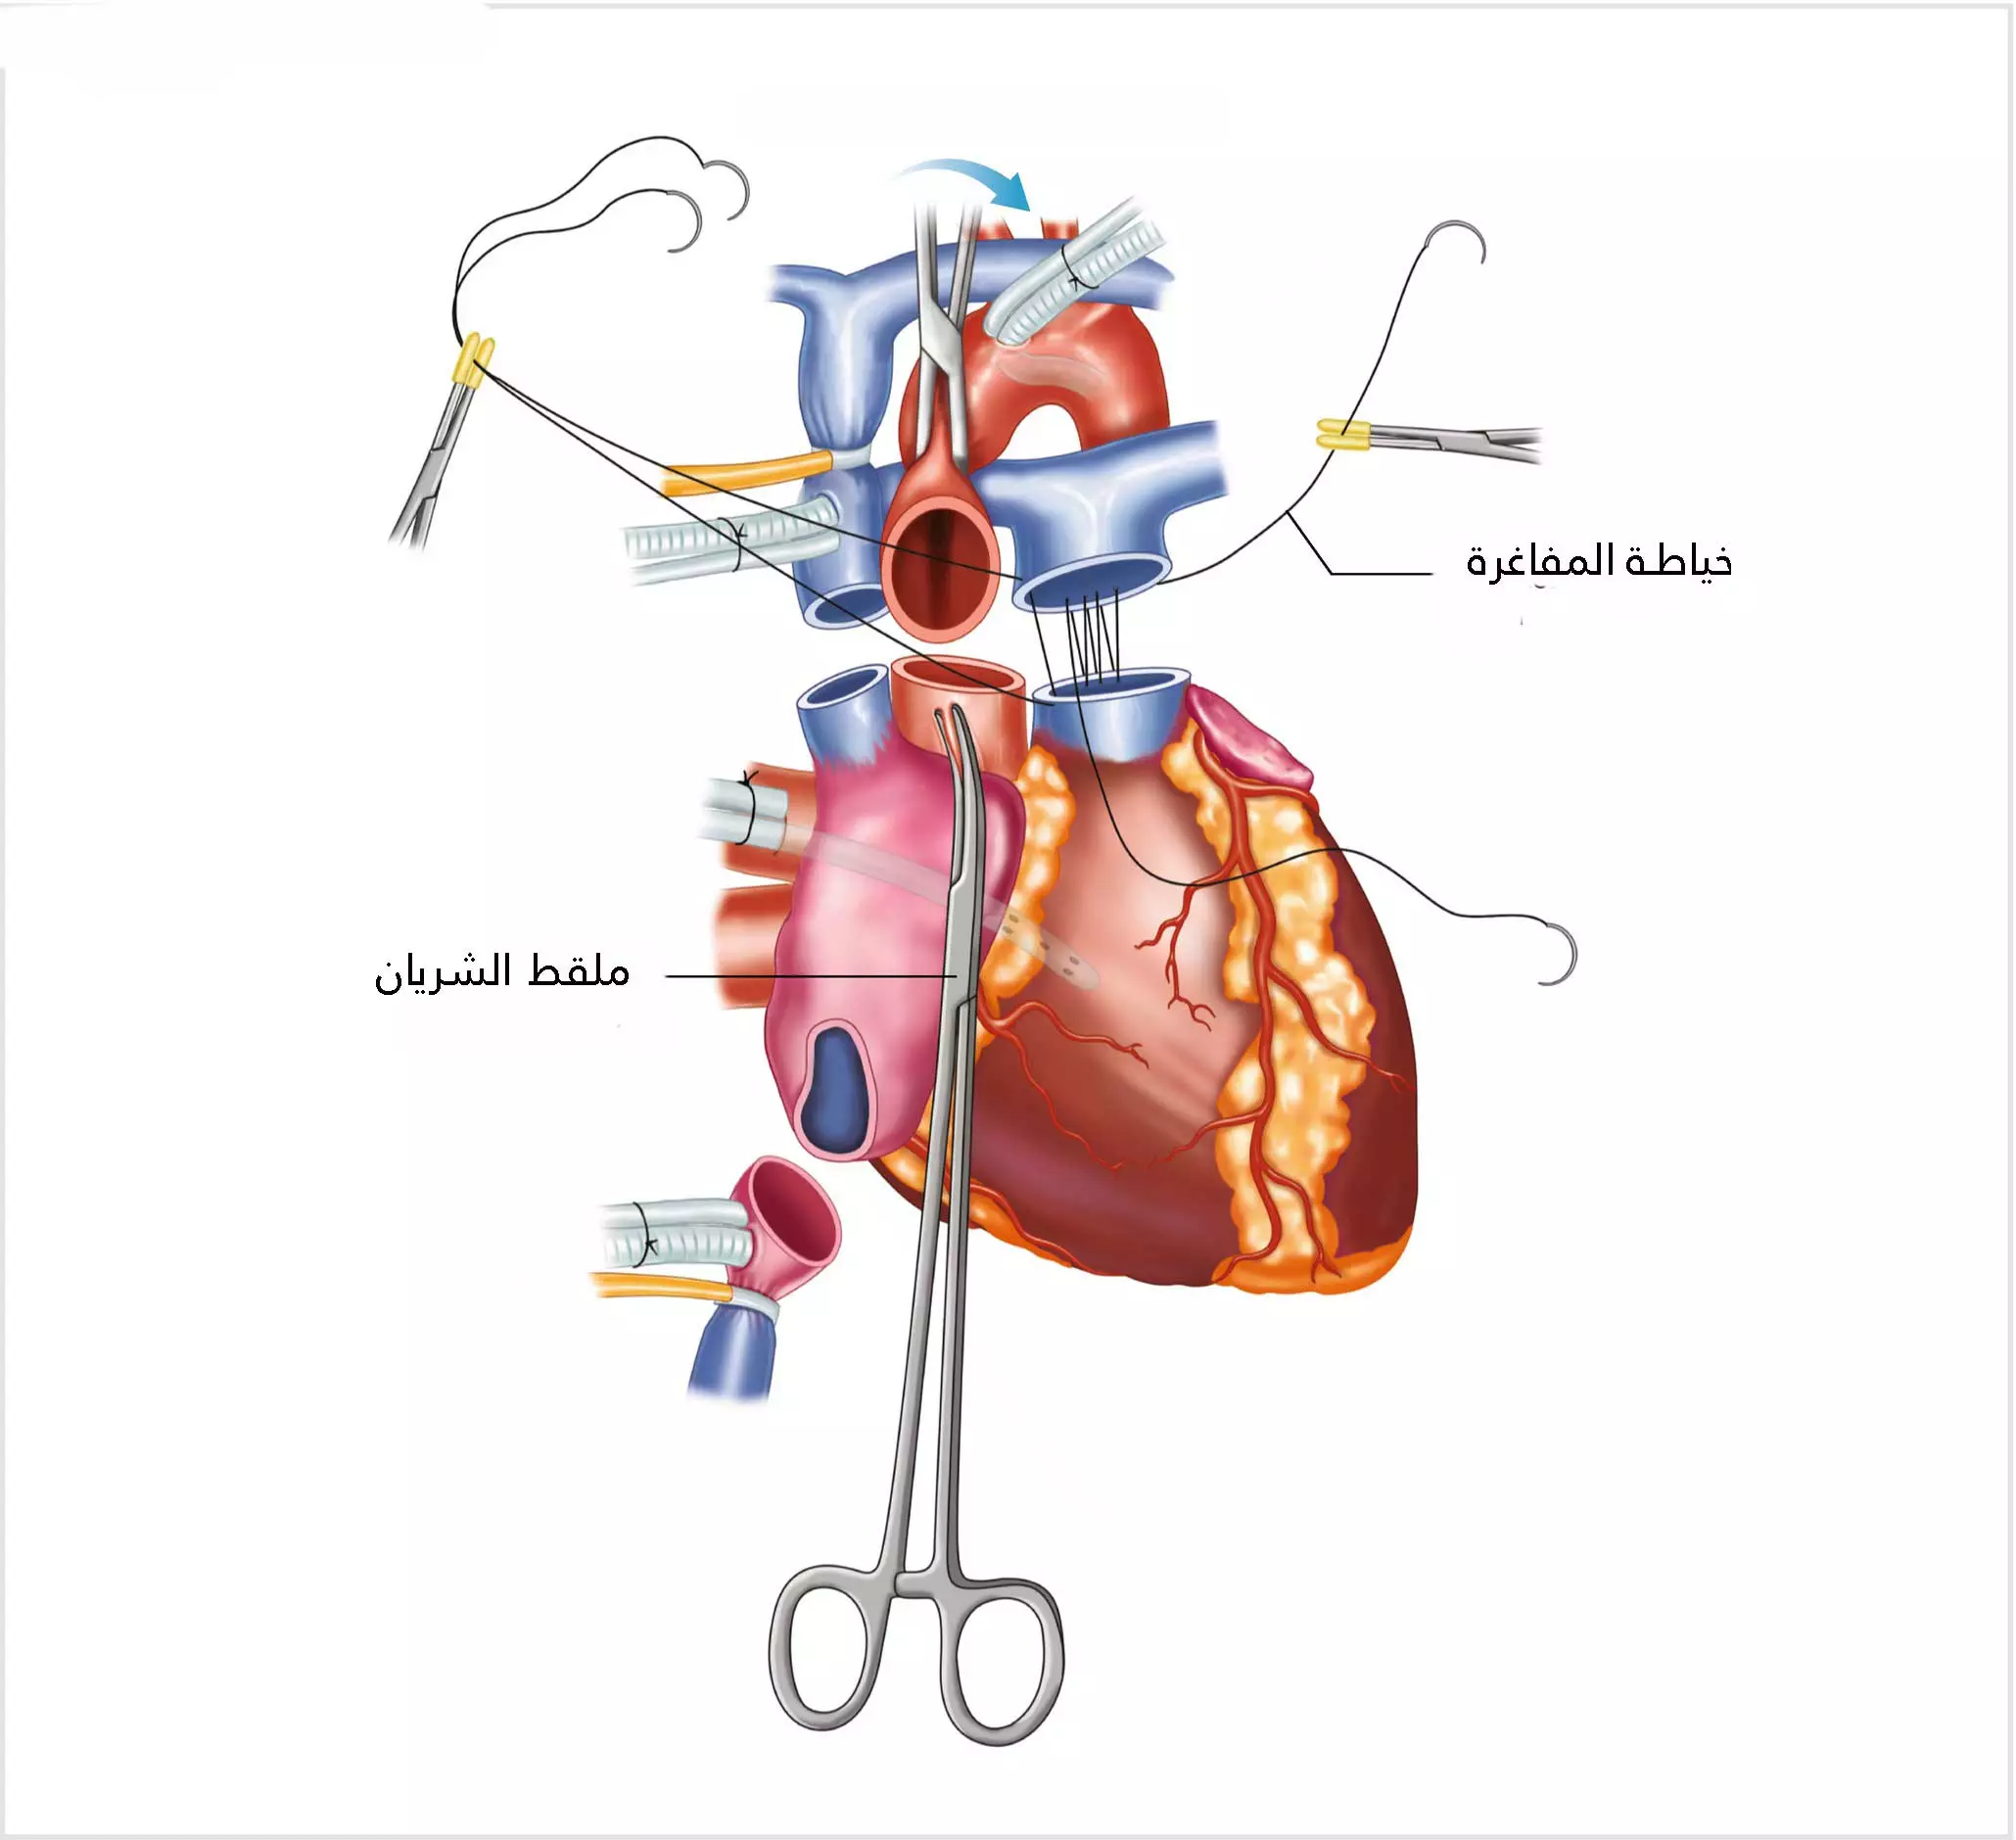 After placing the donated heart in place of the old heart, the arteries and veins are connected in their proper place